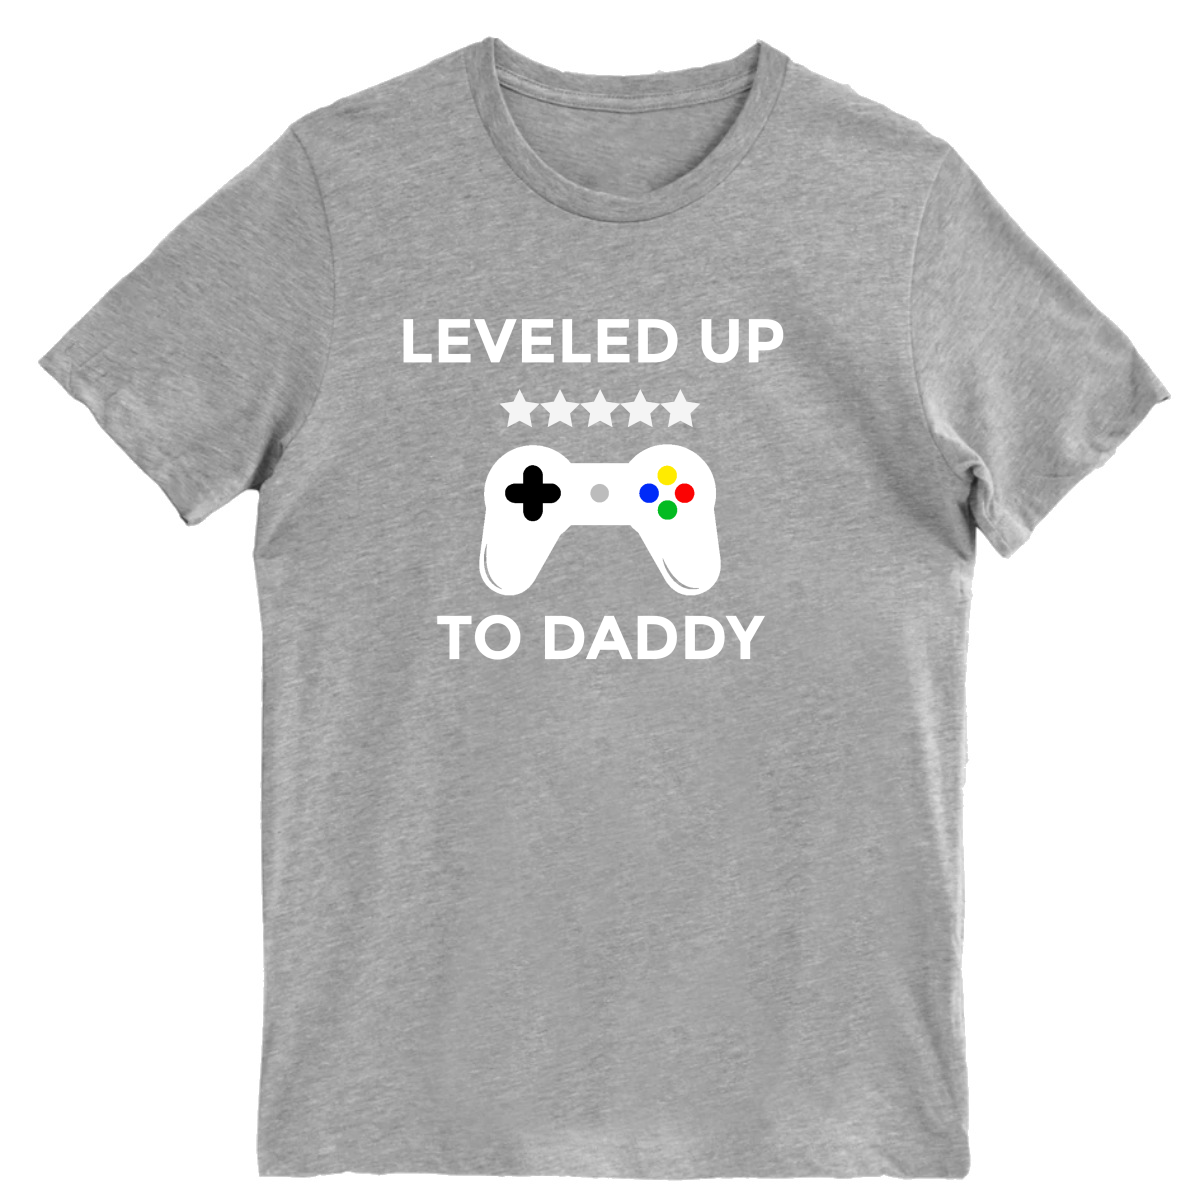 LEVELED UP TO DADDY Men's T-shirt | Gray